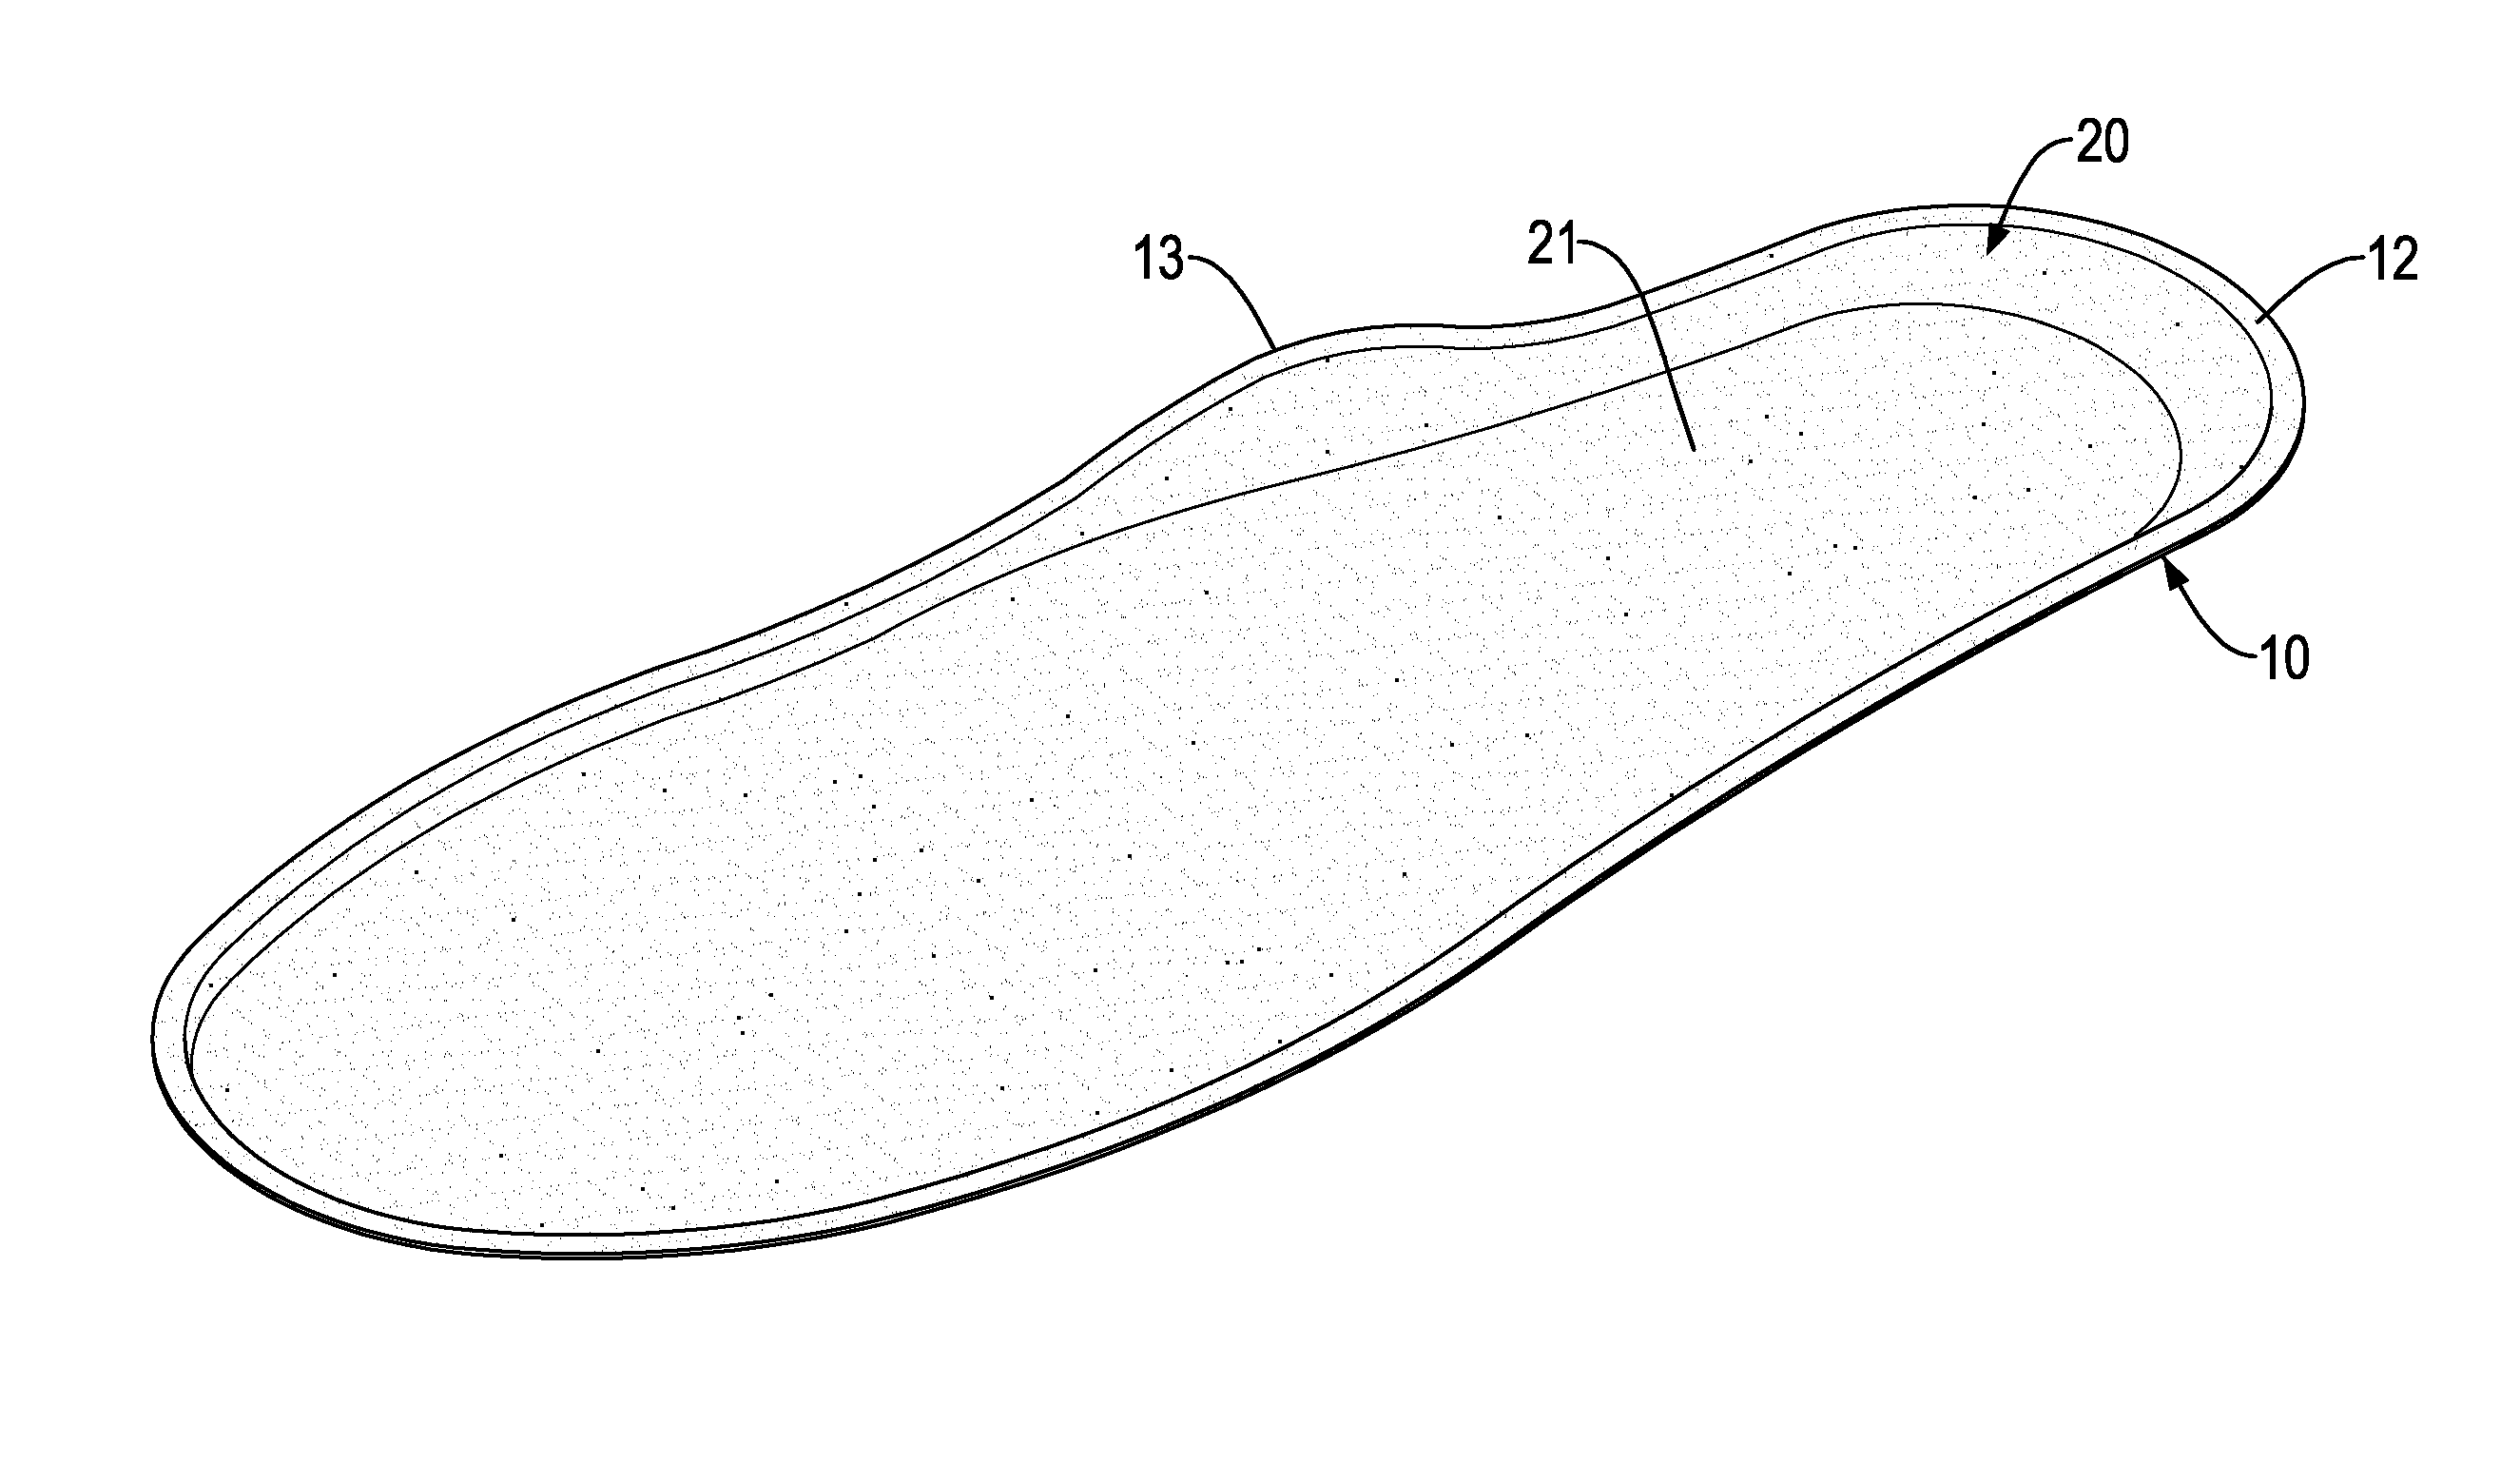 Footbed and method for making the same